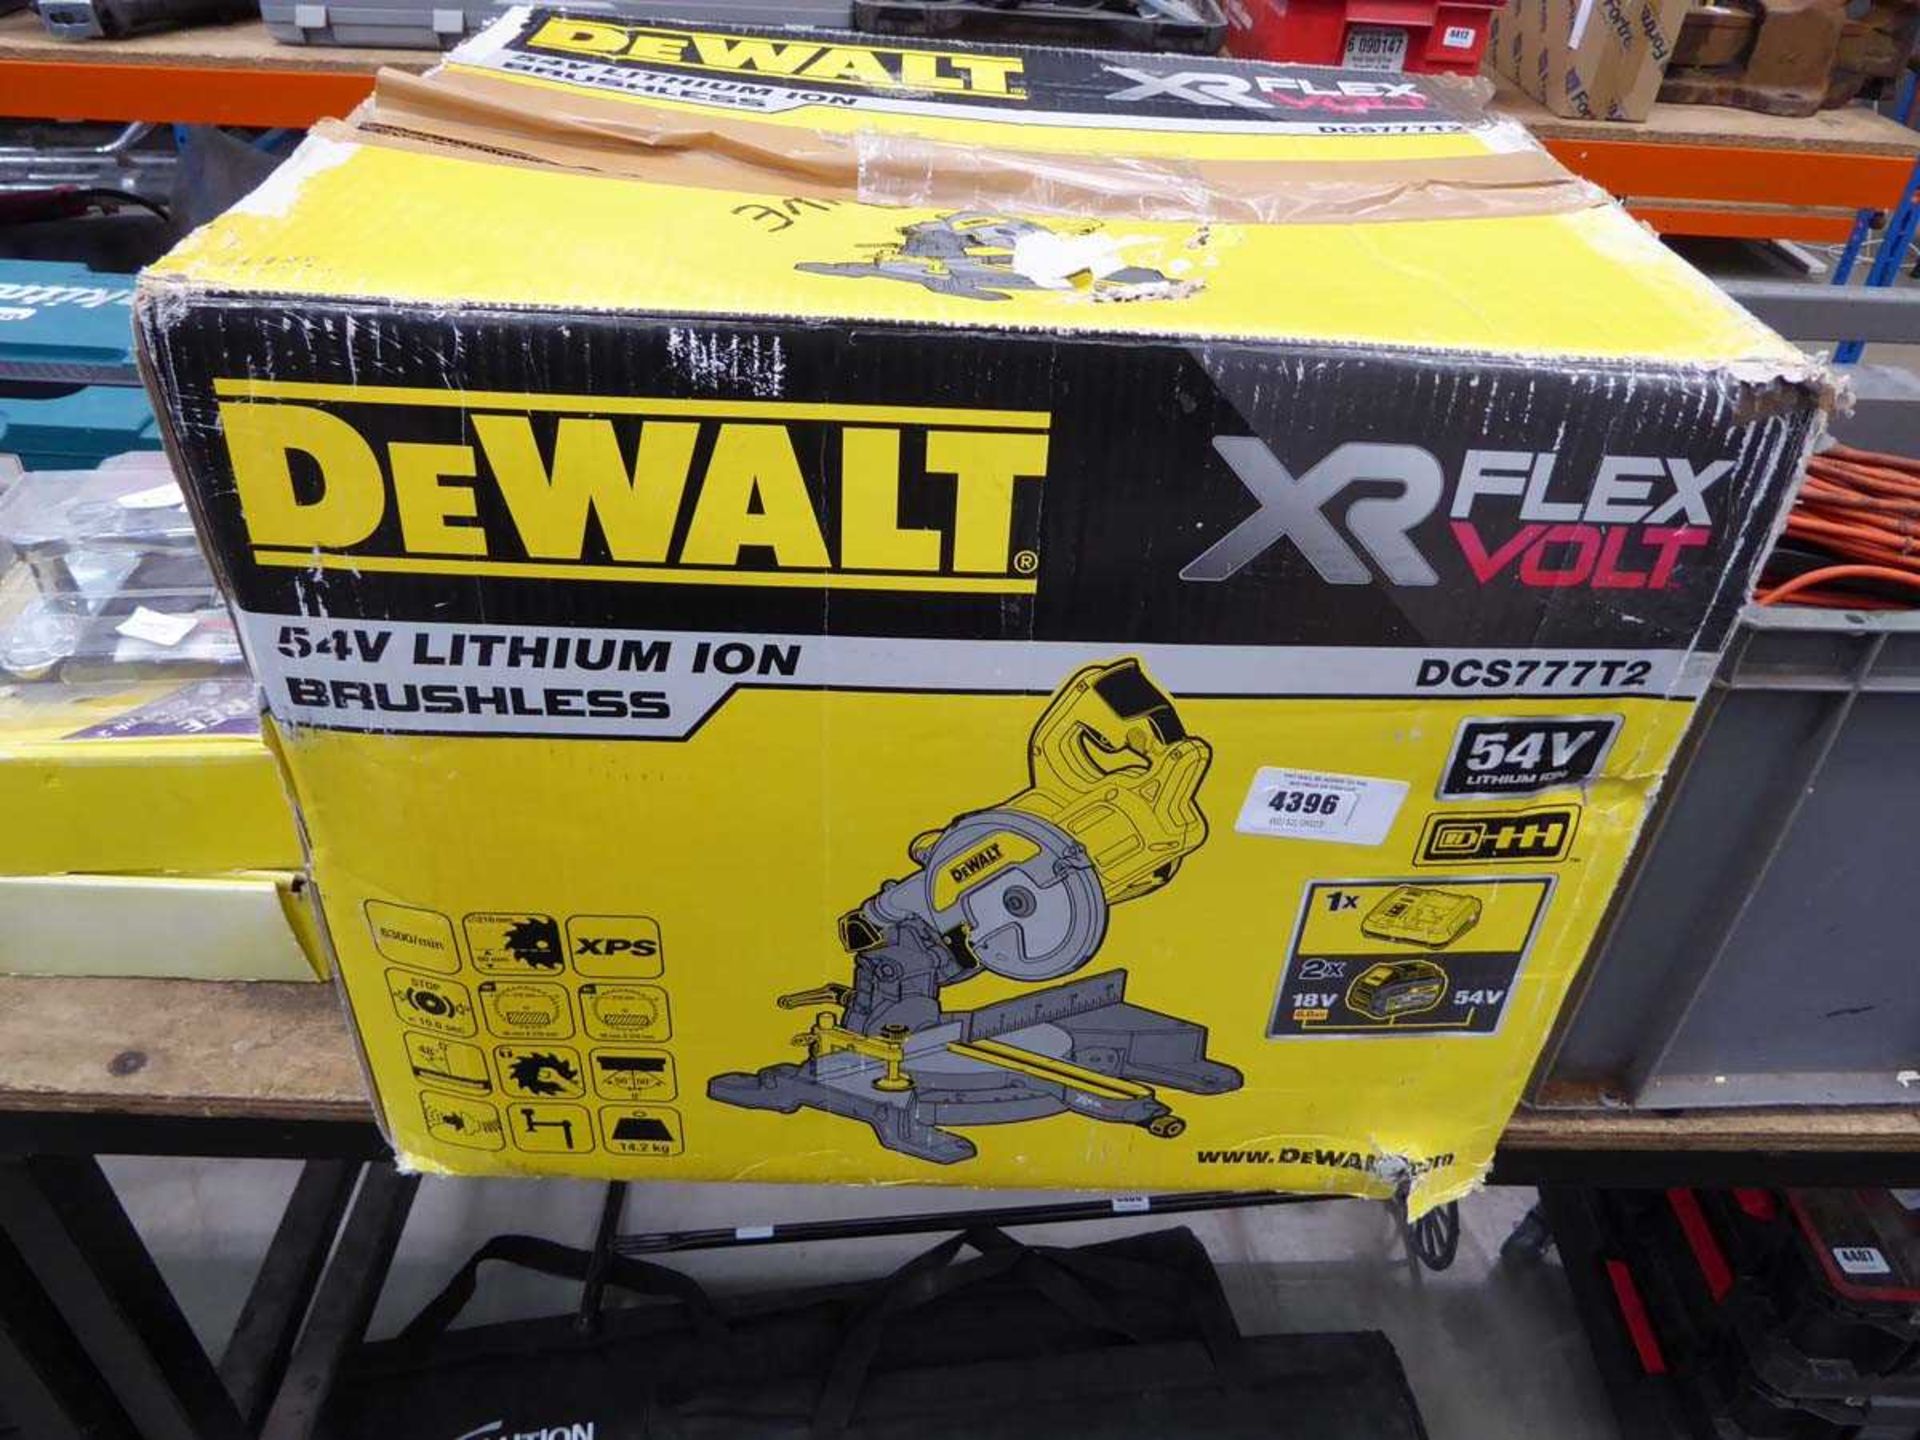 +VAT DeWalt XR boxed battery powered chop saw with 2 batteries, no charger